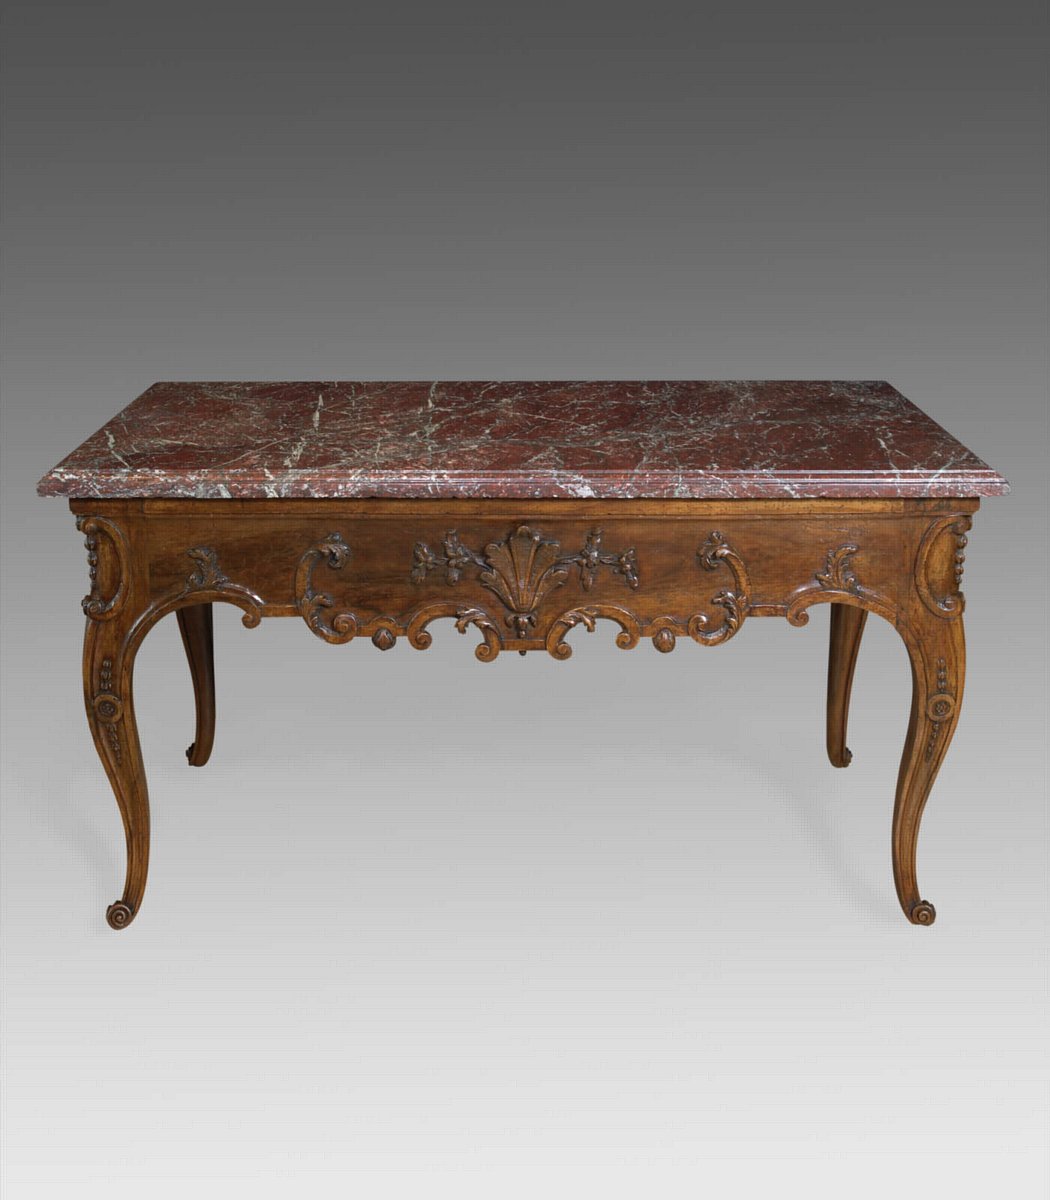 French Louis XV Period, Walnut Console Table Attributed to Pierre Hache